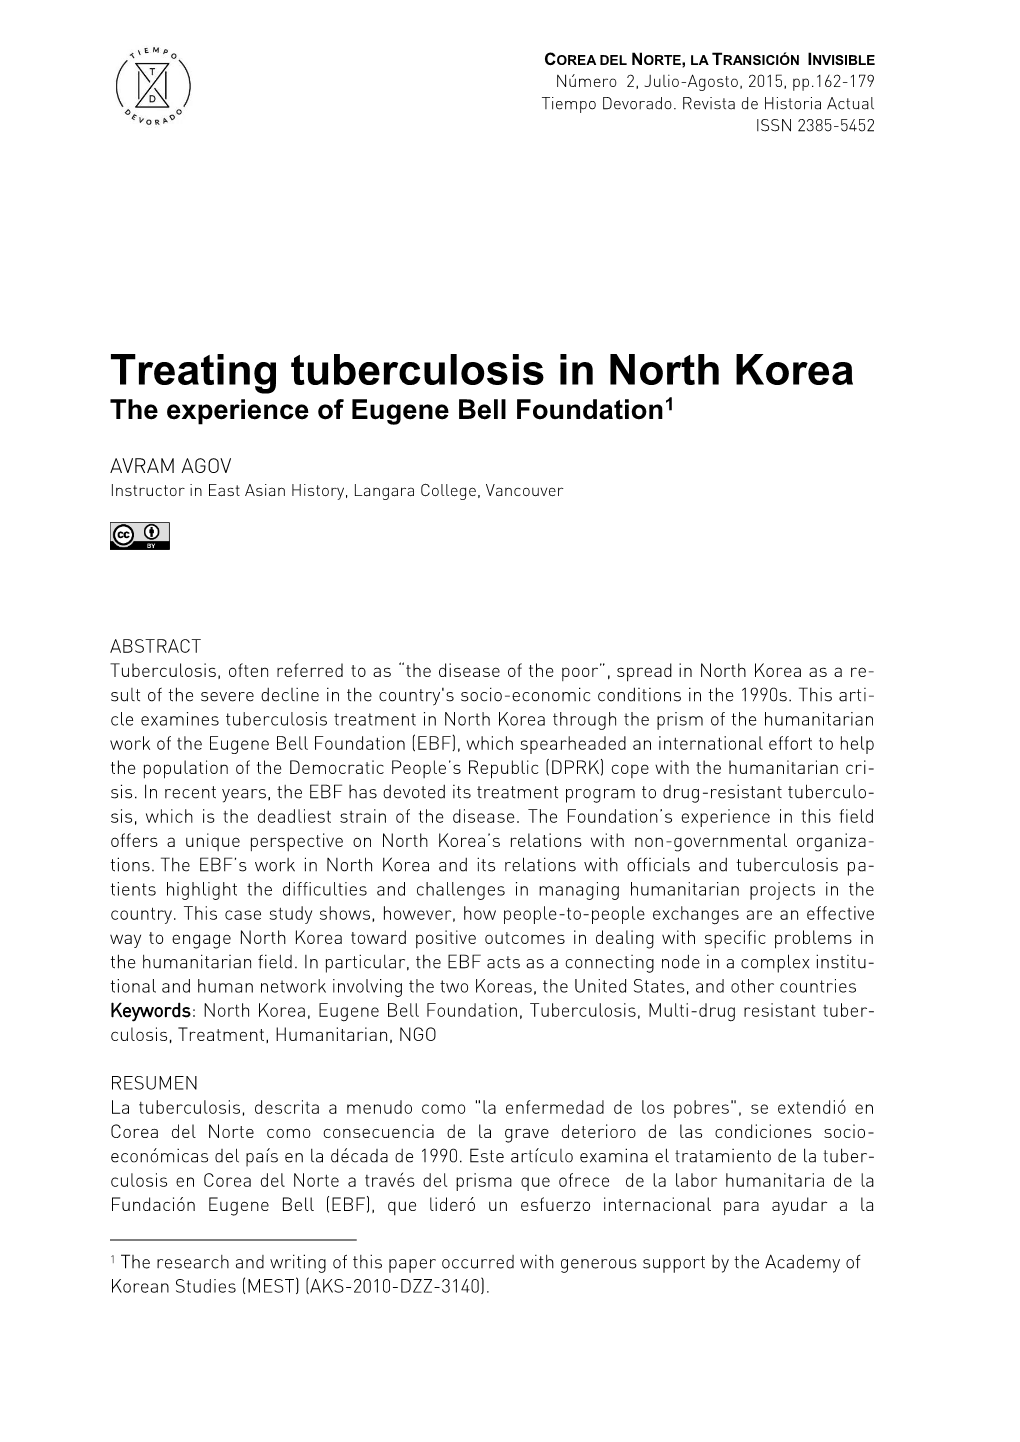 Treating Tuberculosis in North Korea the Experience of Eugene Bell Foundation1